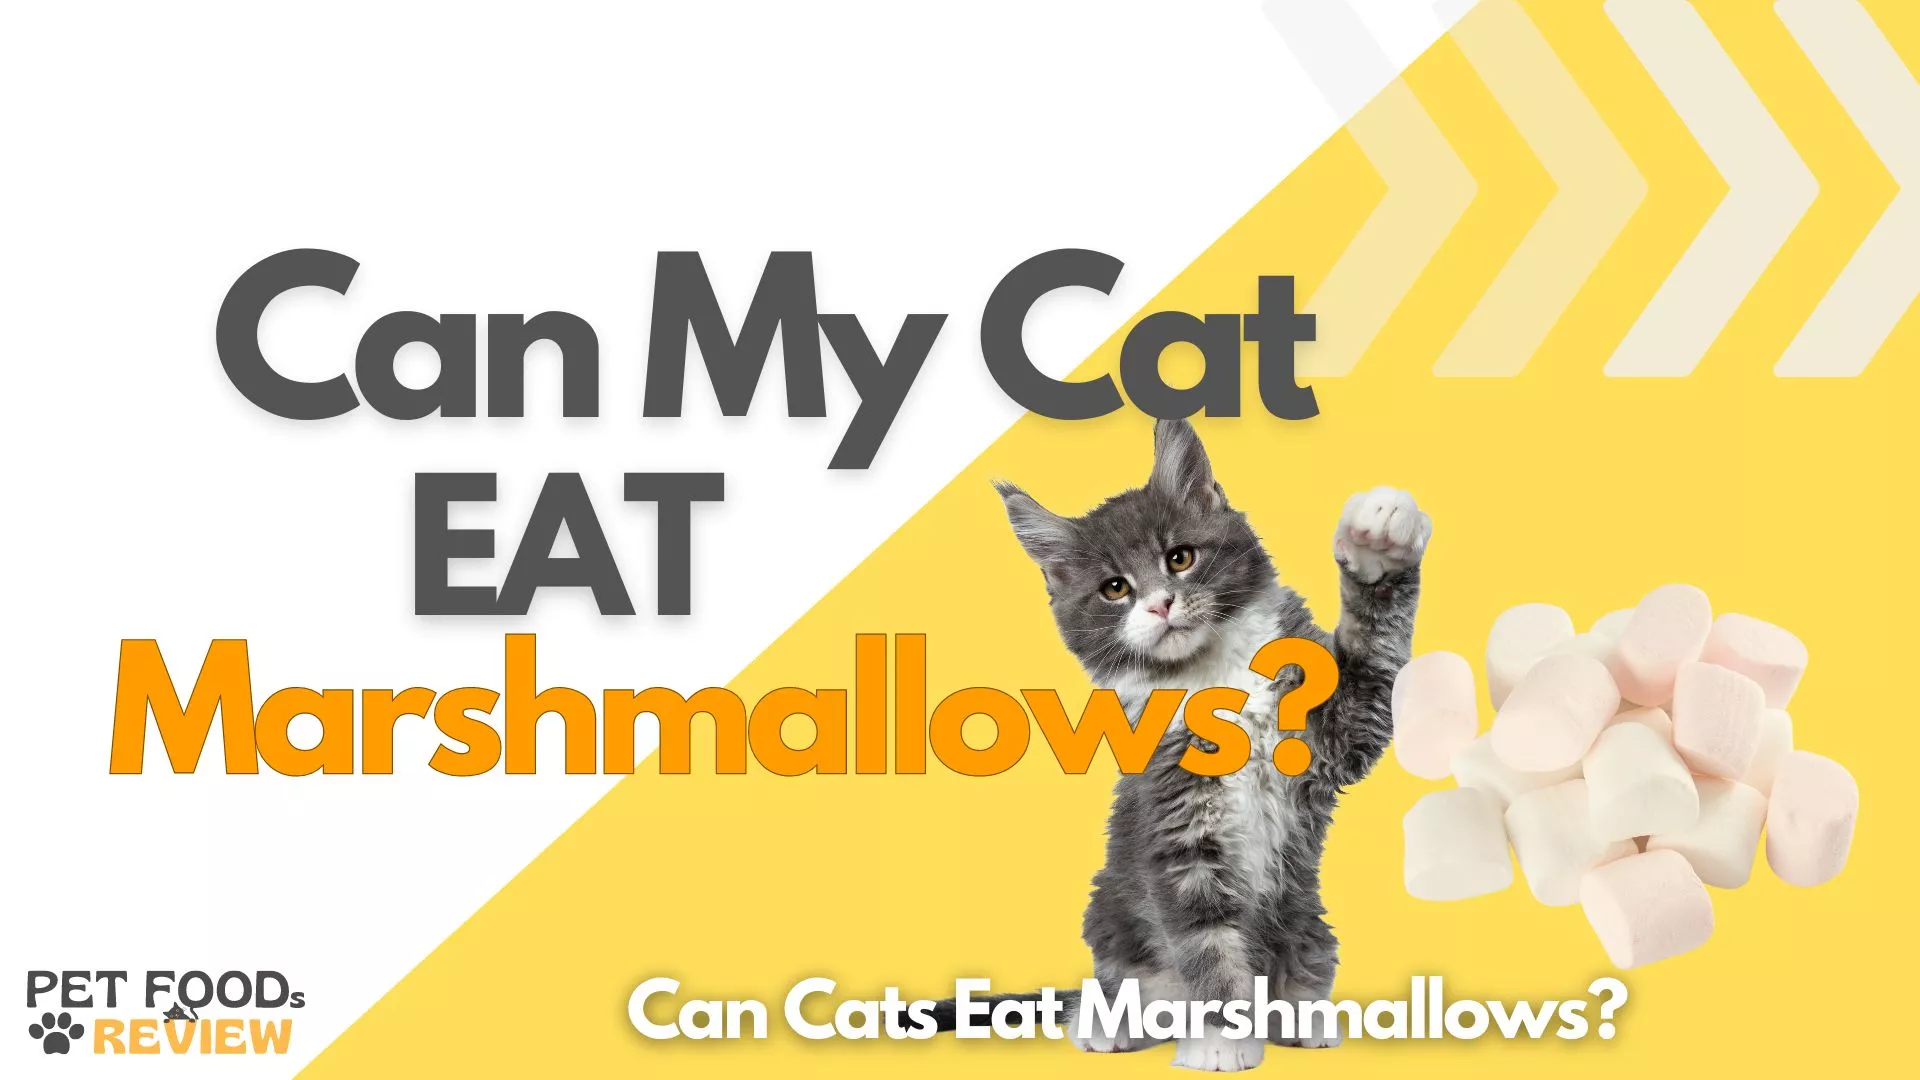 Can Cats Eat Marshmallows?